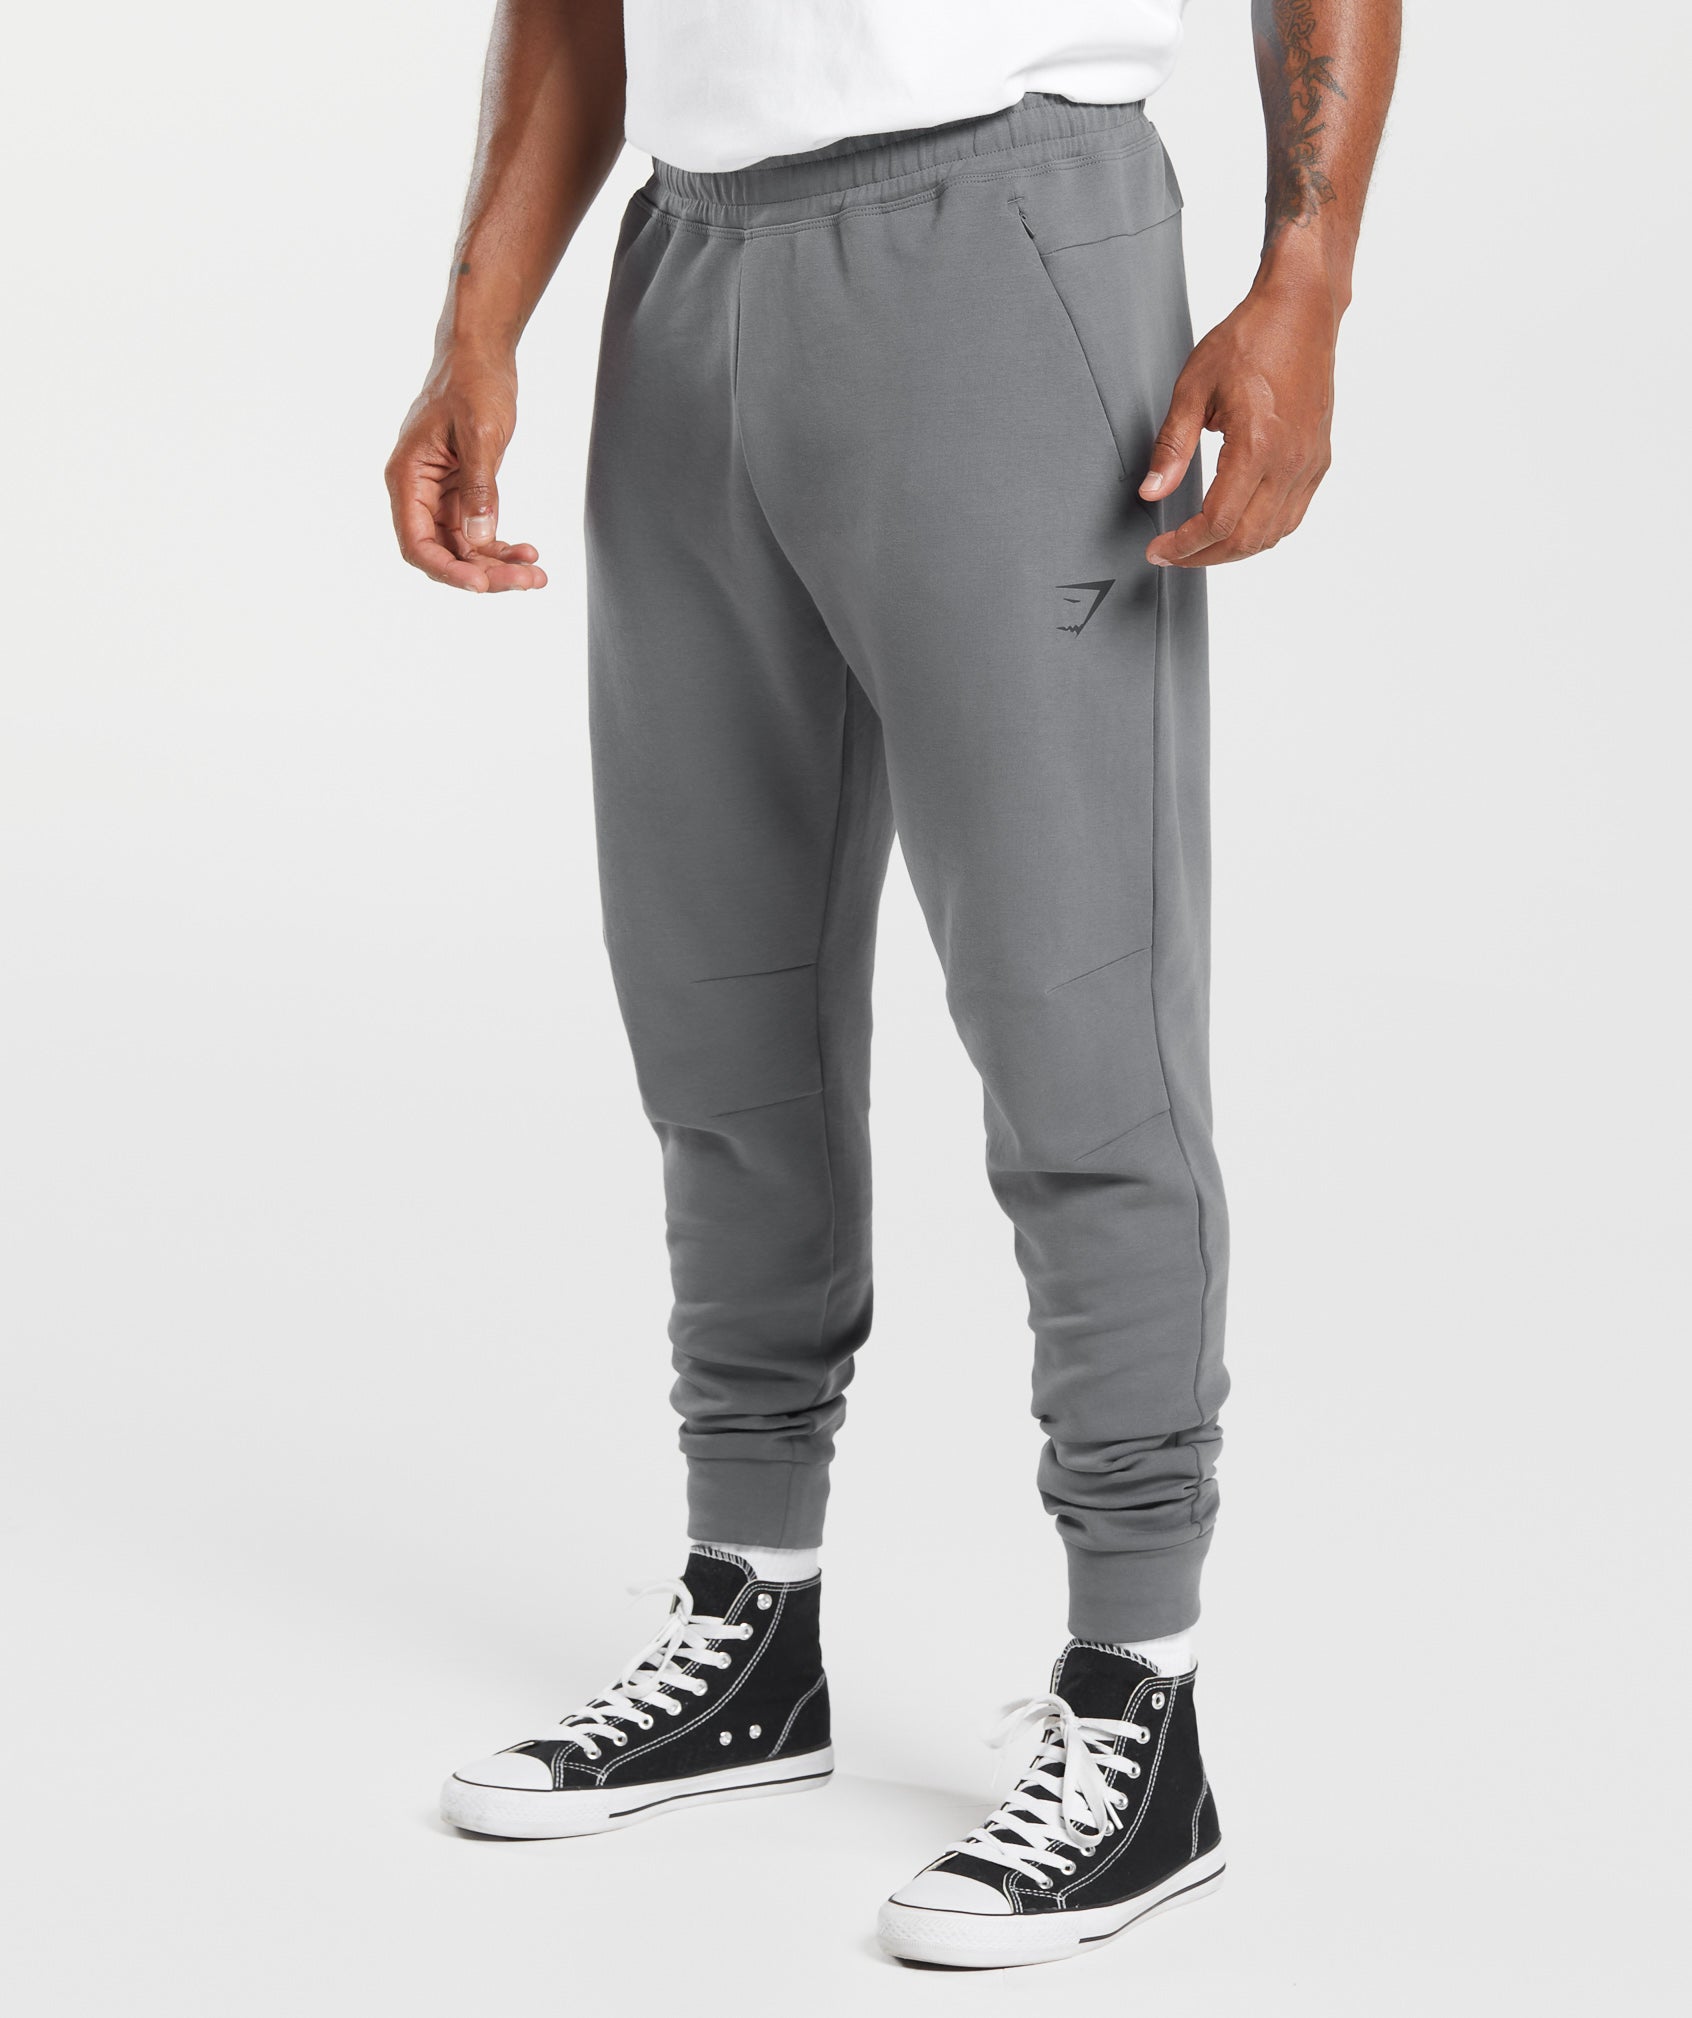 Rest Day Knit Joggers in Pitch Grey - view 3